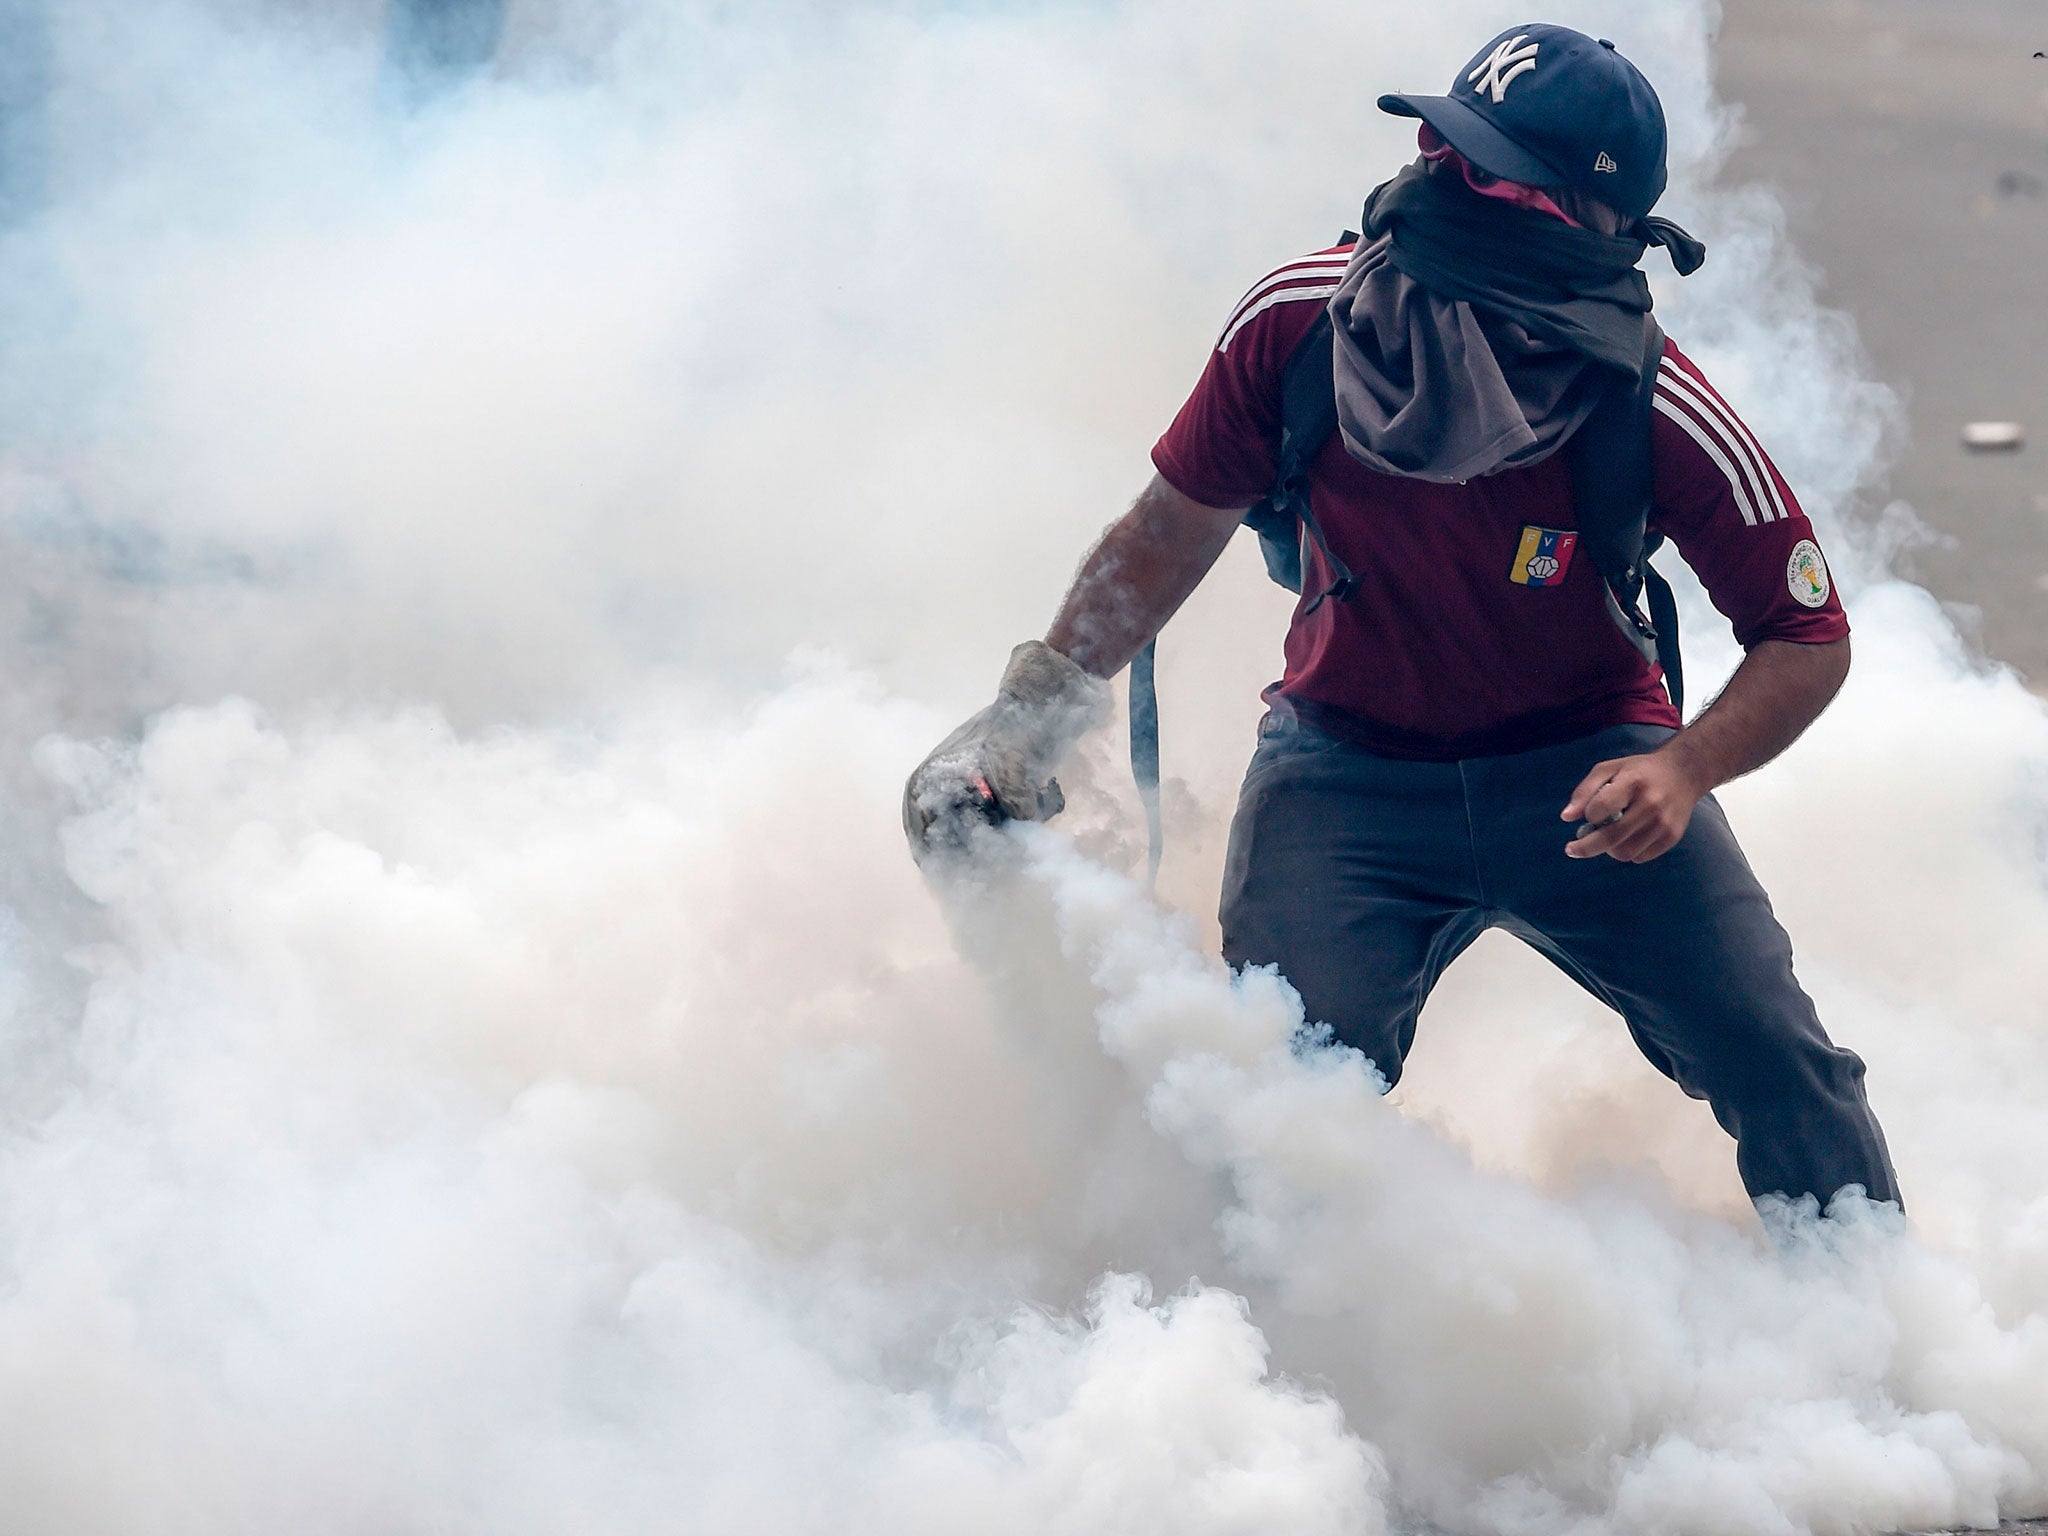 Seventeen people were killed after a tear gas attack. Here, a protester in Caracas holds a canister during a 2017 protest (File photo)